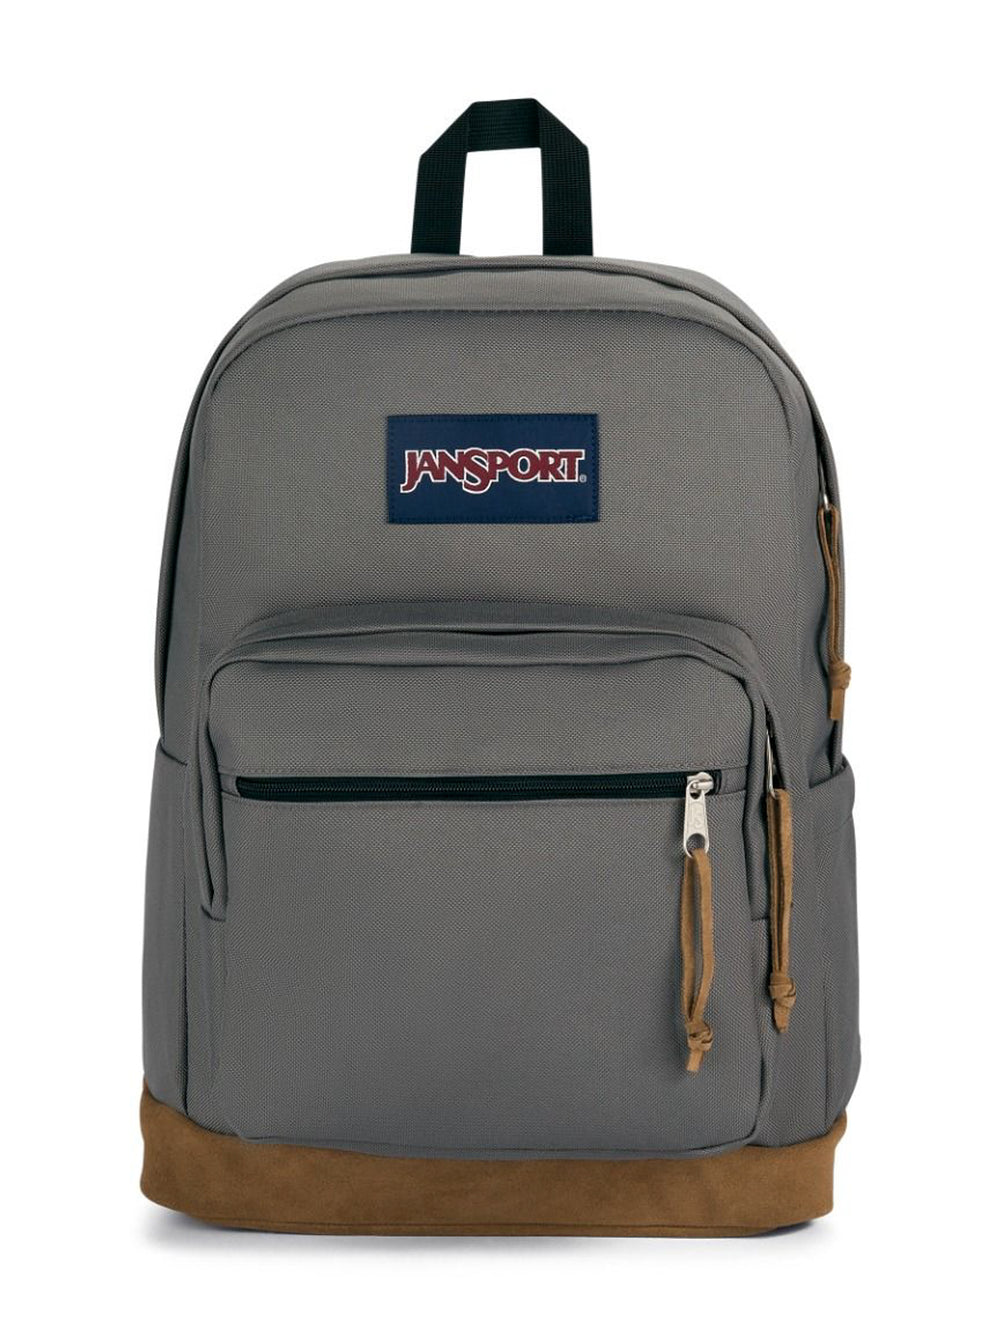 JANSPORT RIGHT PACK - CLEARANCE